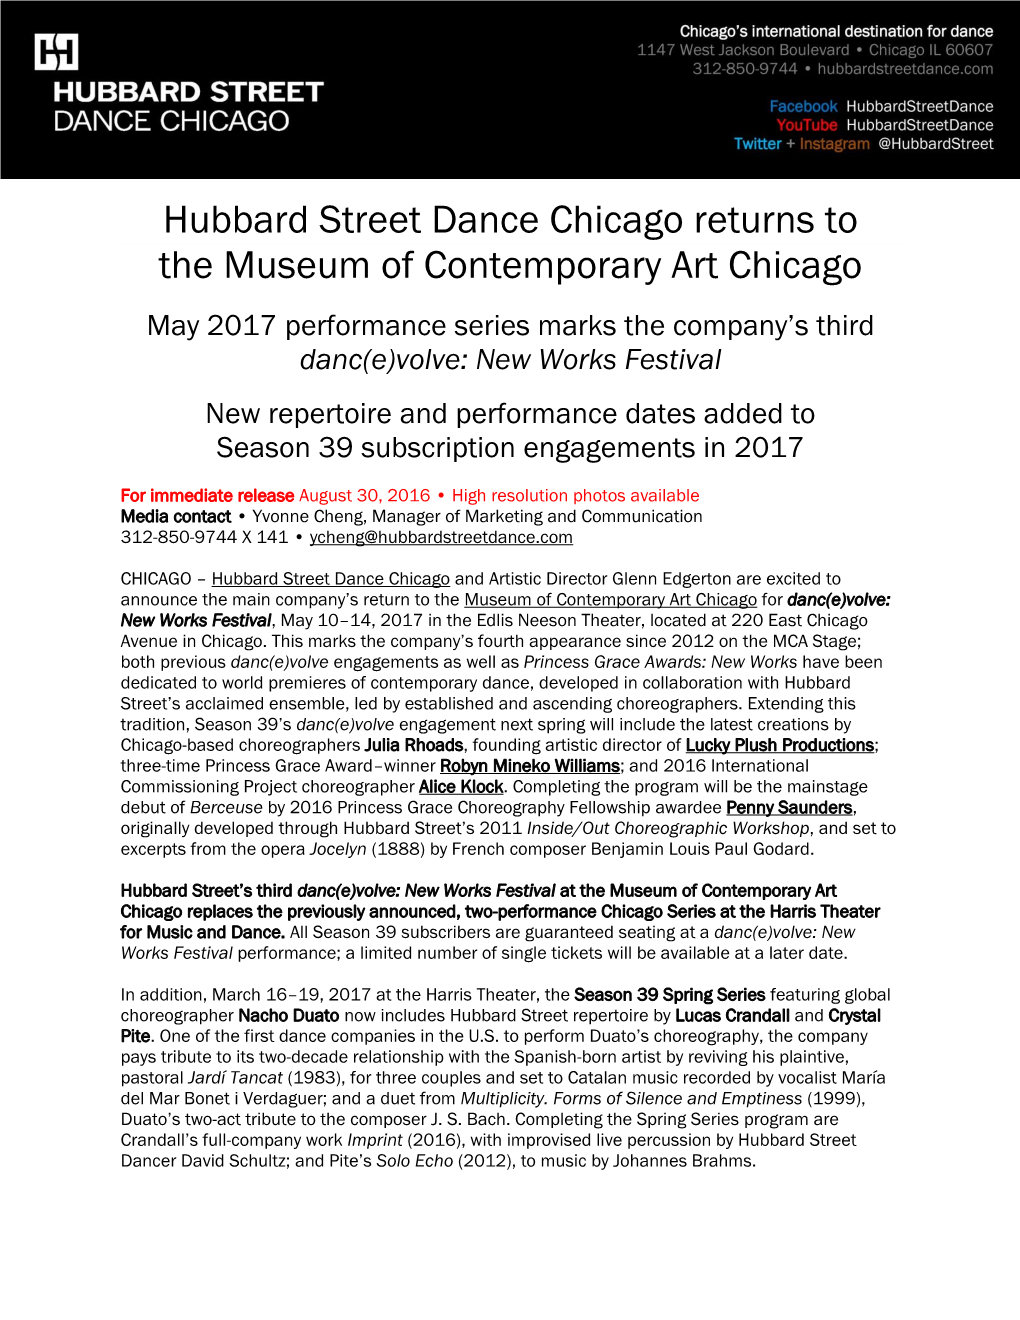 Hubbard Street Dance Chicago Returns to the Museum Of